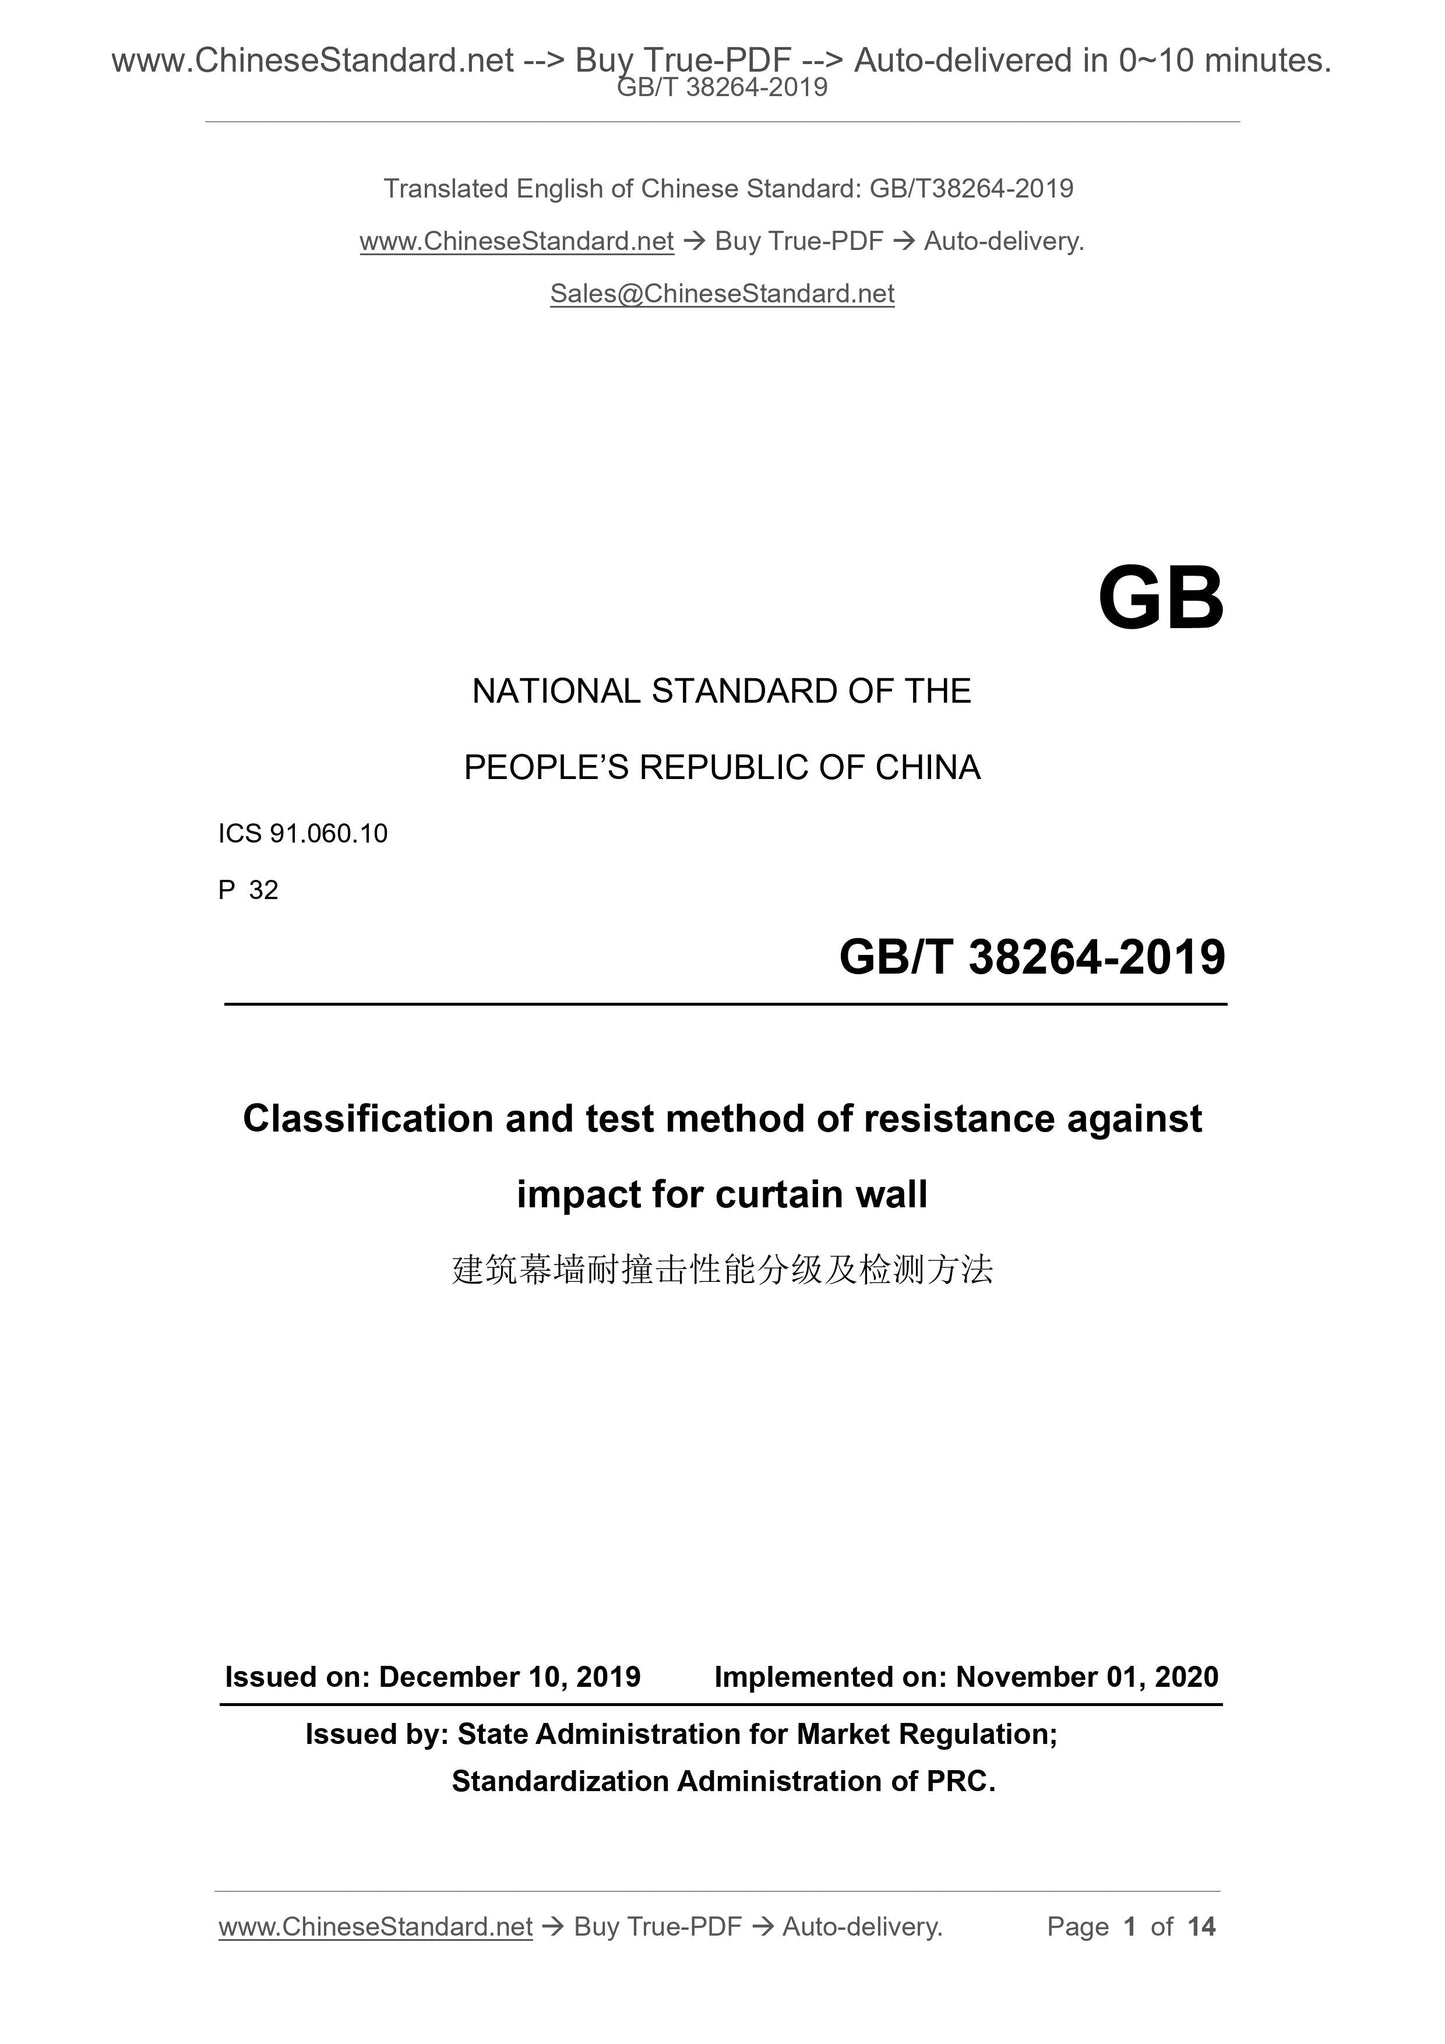 GB/T 38264-2019 Page 1